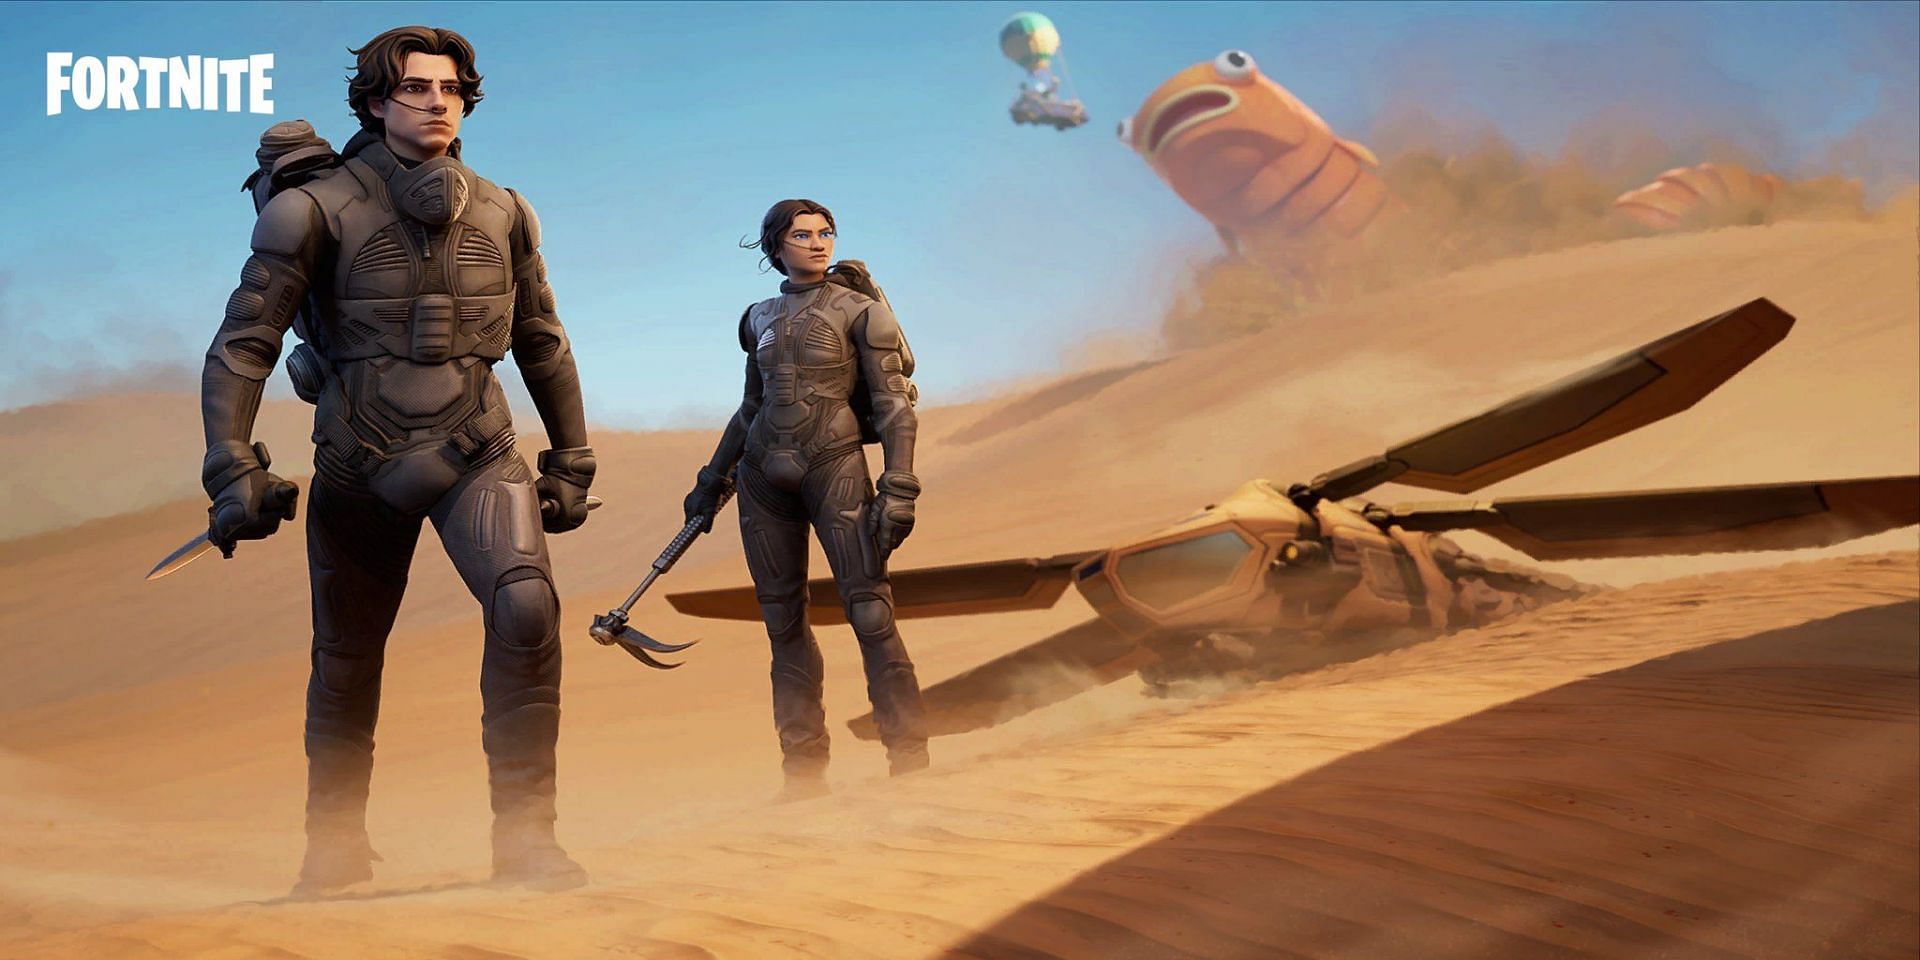 Fortnite Dune Collaboration has fans on the edge of their seats (Image via Fortnite/Epic Games)